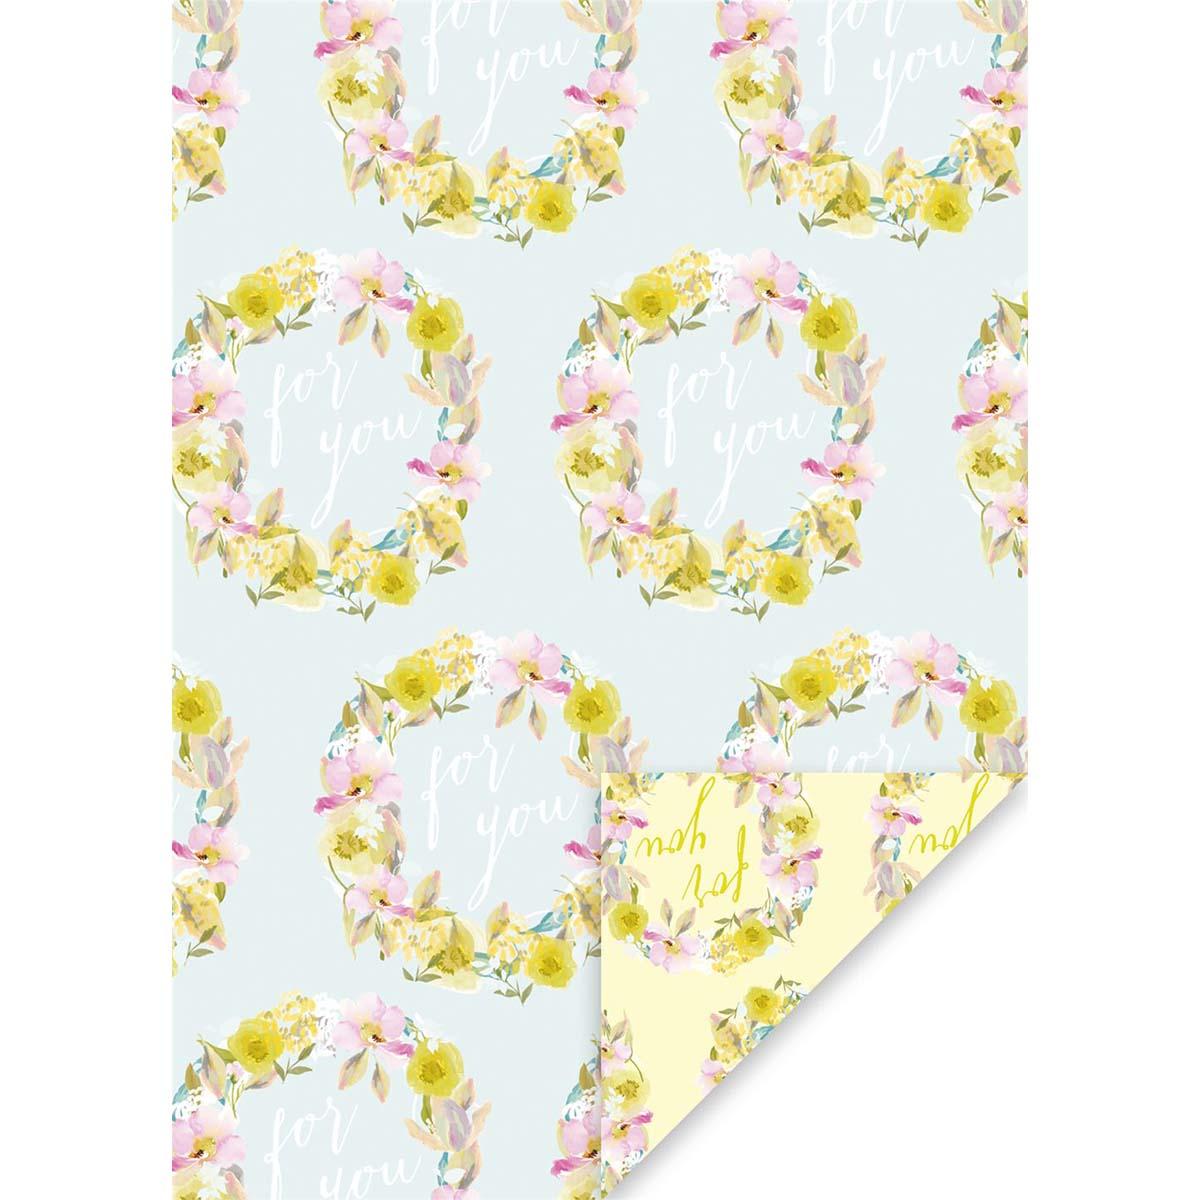 Image Of Mint Floral Wreath Wrapping Paper